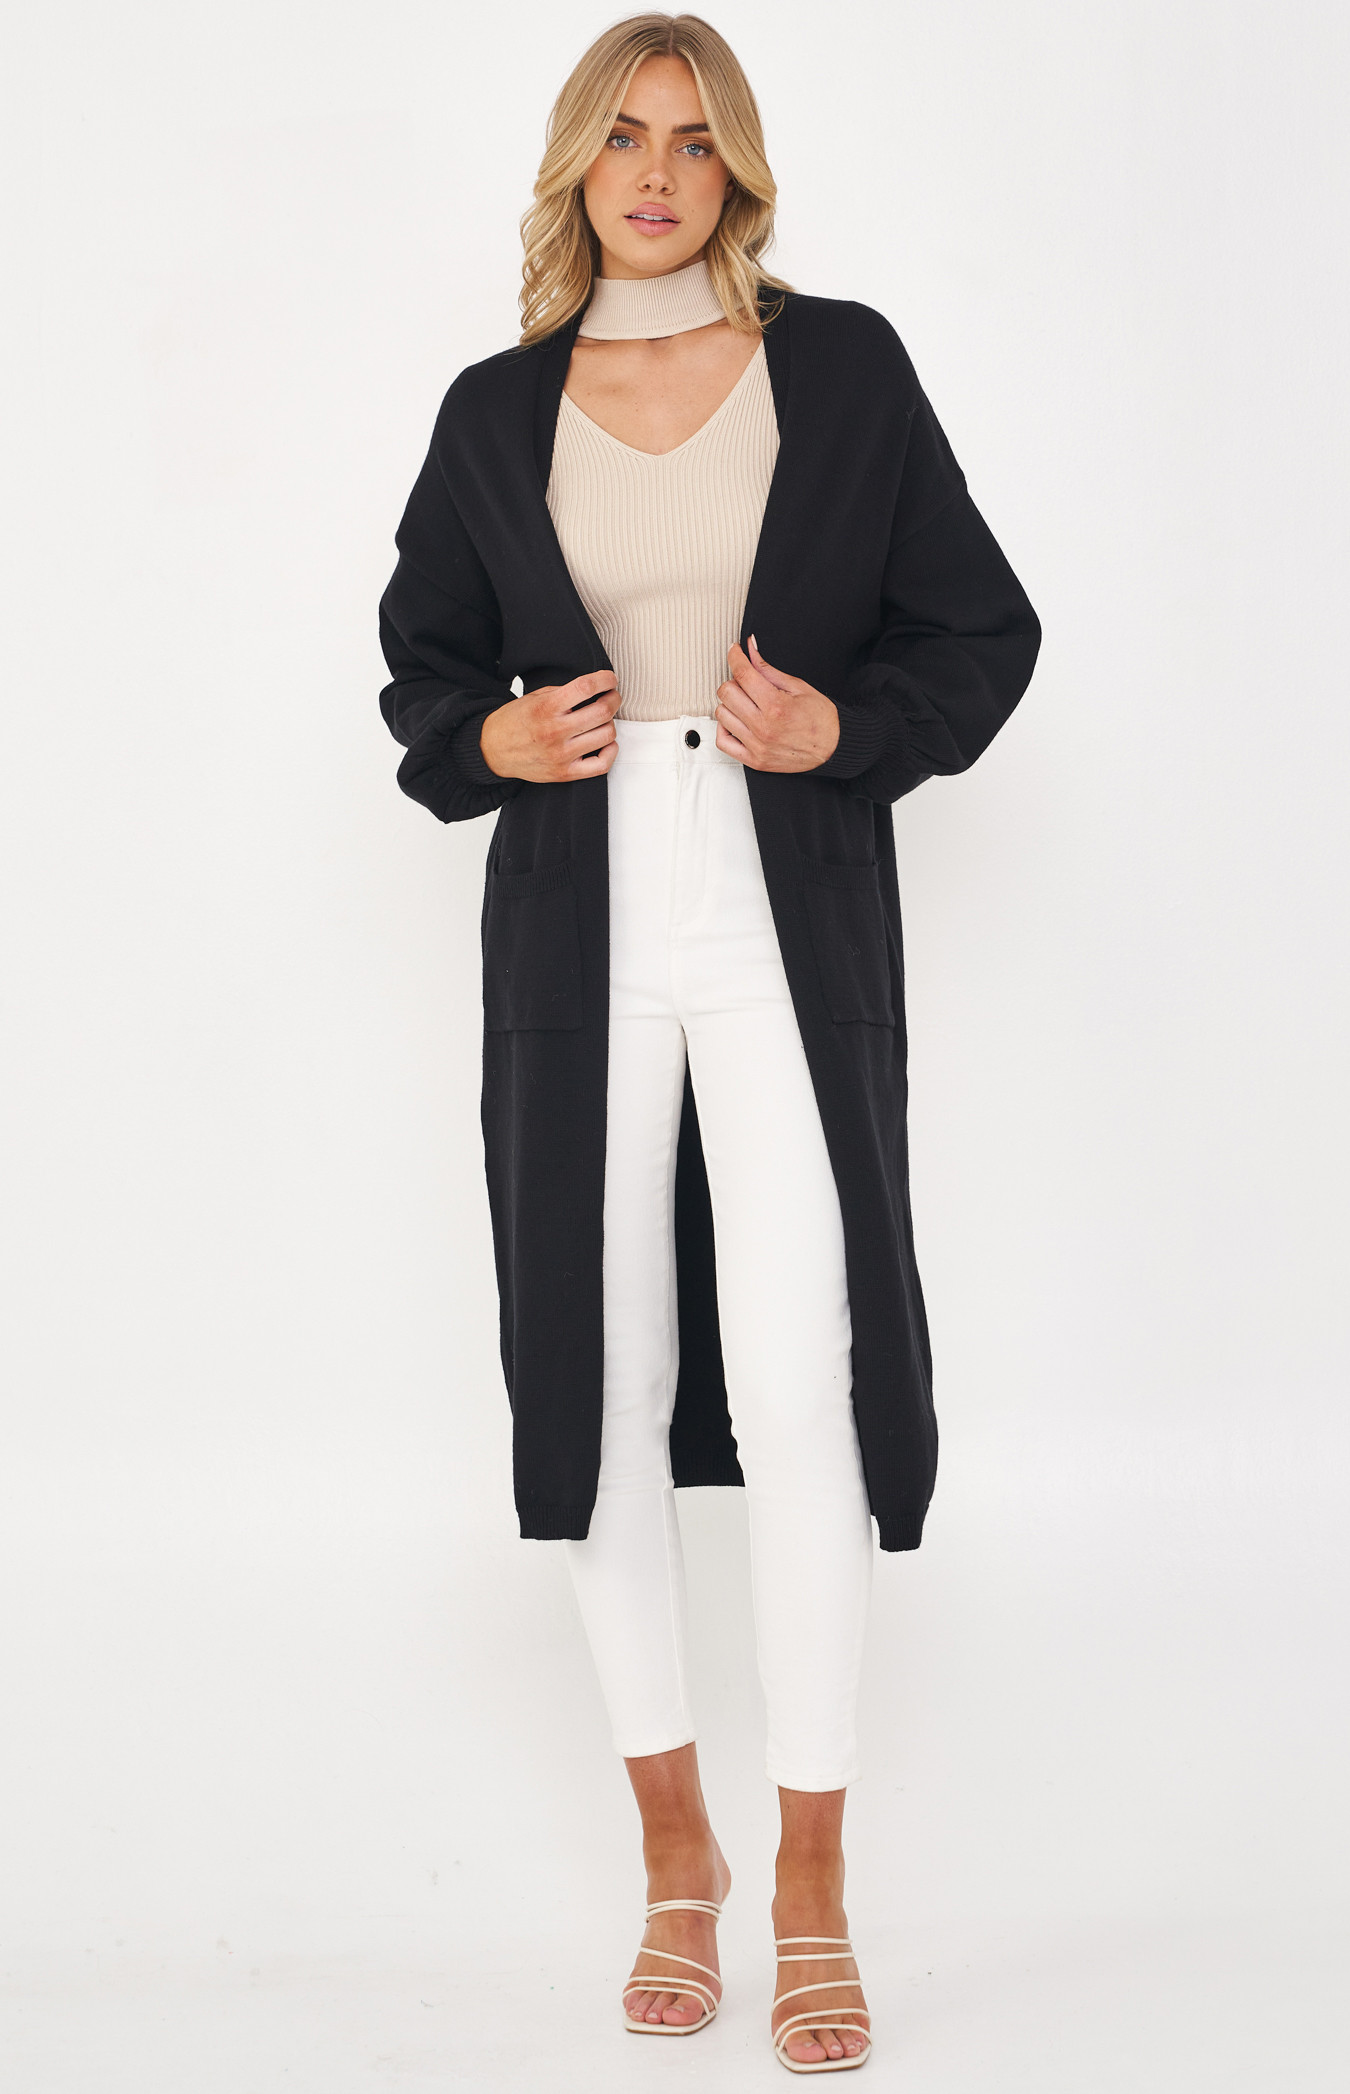 Longline Cardigan with Bubble Sleeves and Pockets (SKN585)